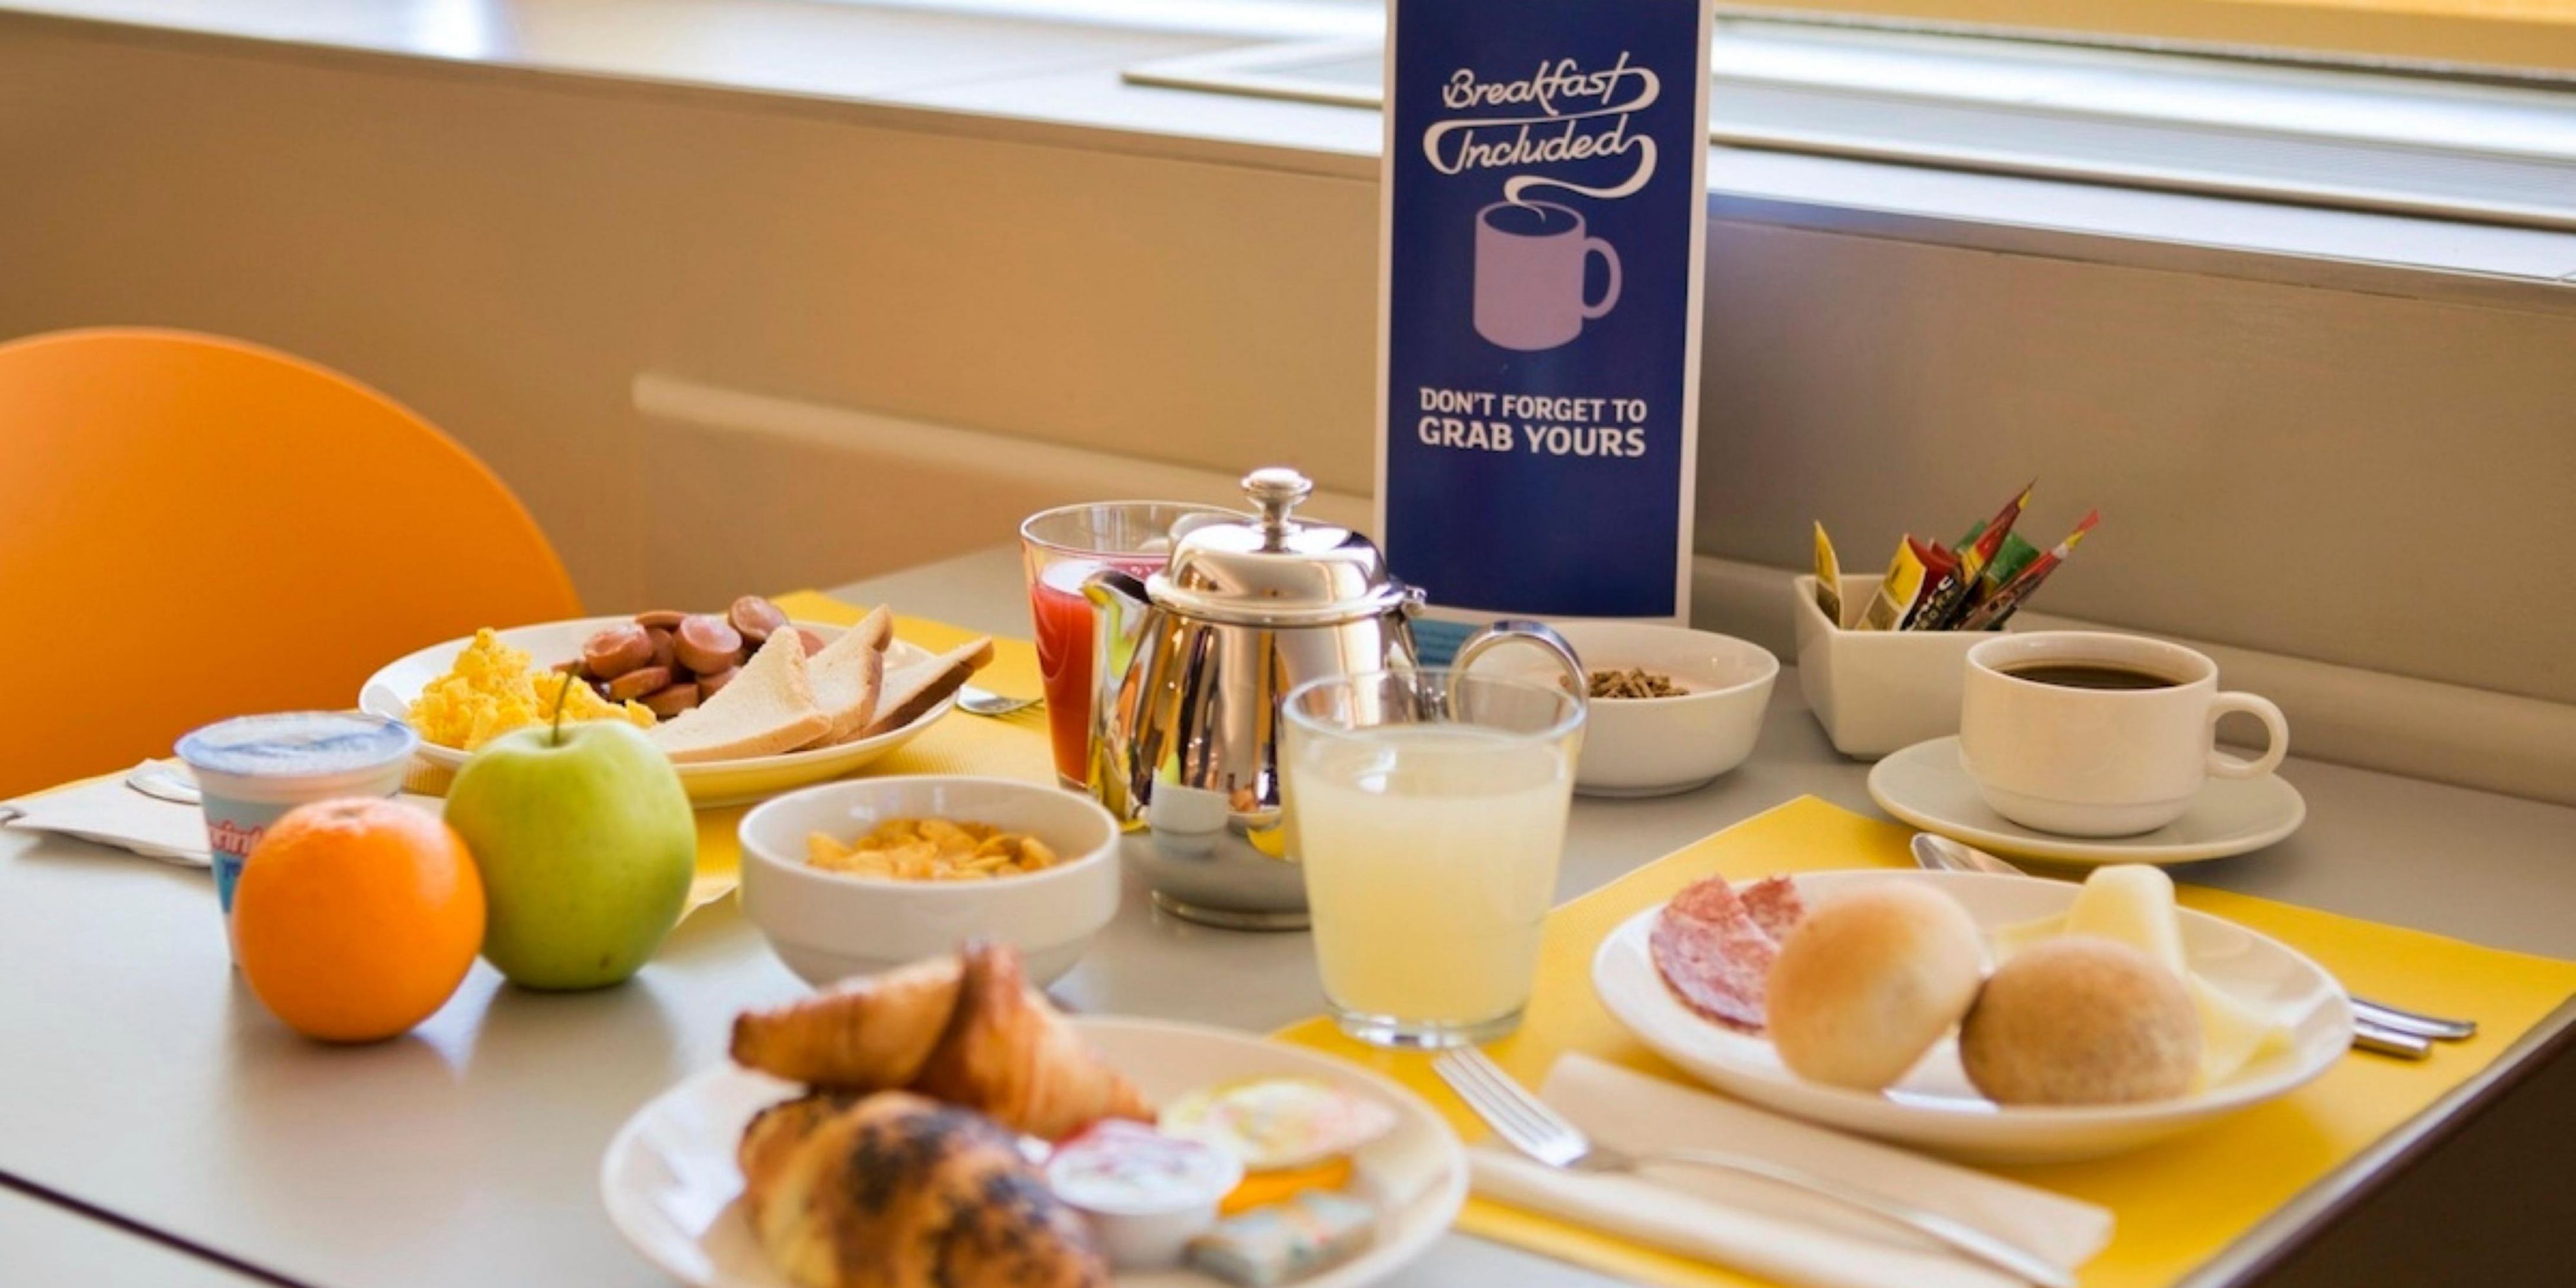 Breakfast is always included in the rate! We offer a self-service buffet with food and beverage selections. Take away possible. Opening hours: every day from 05:00 am to 10:00 am.